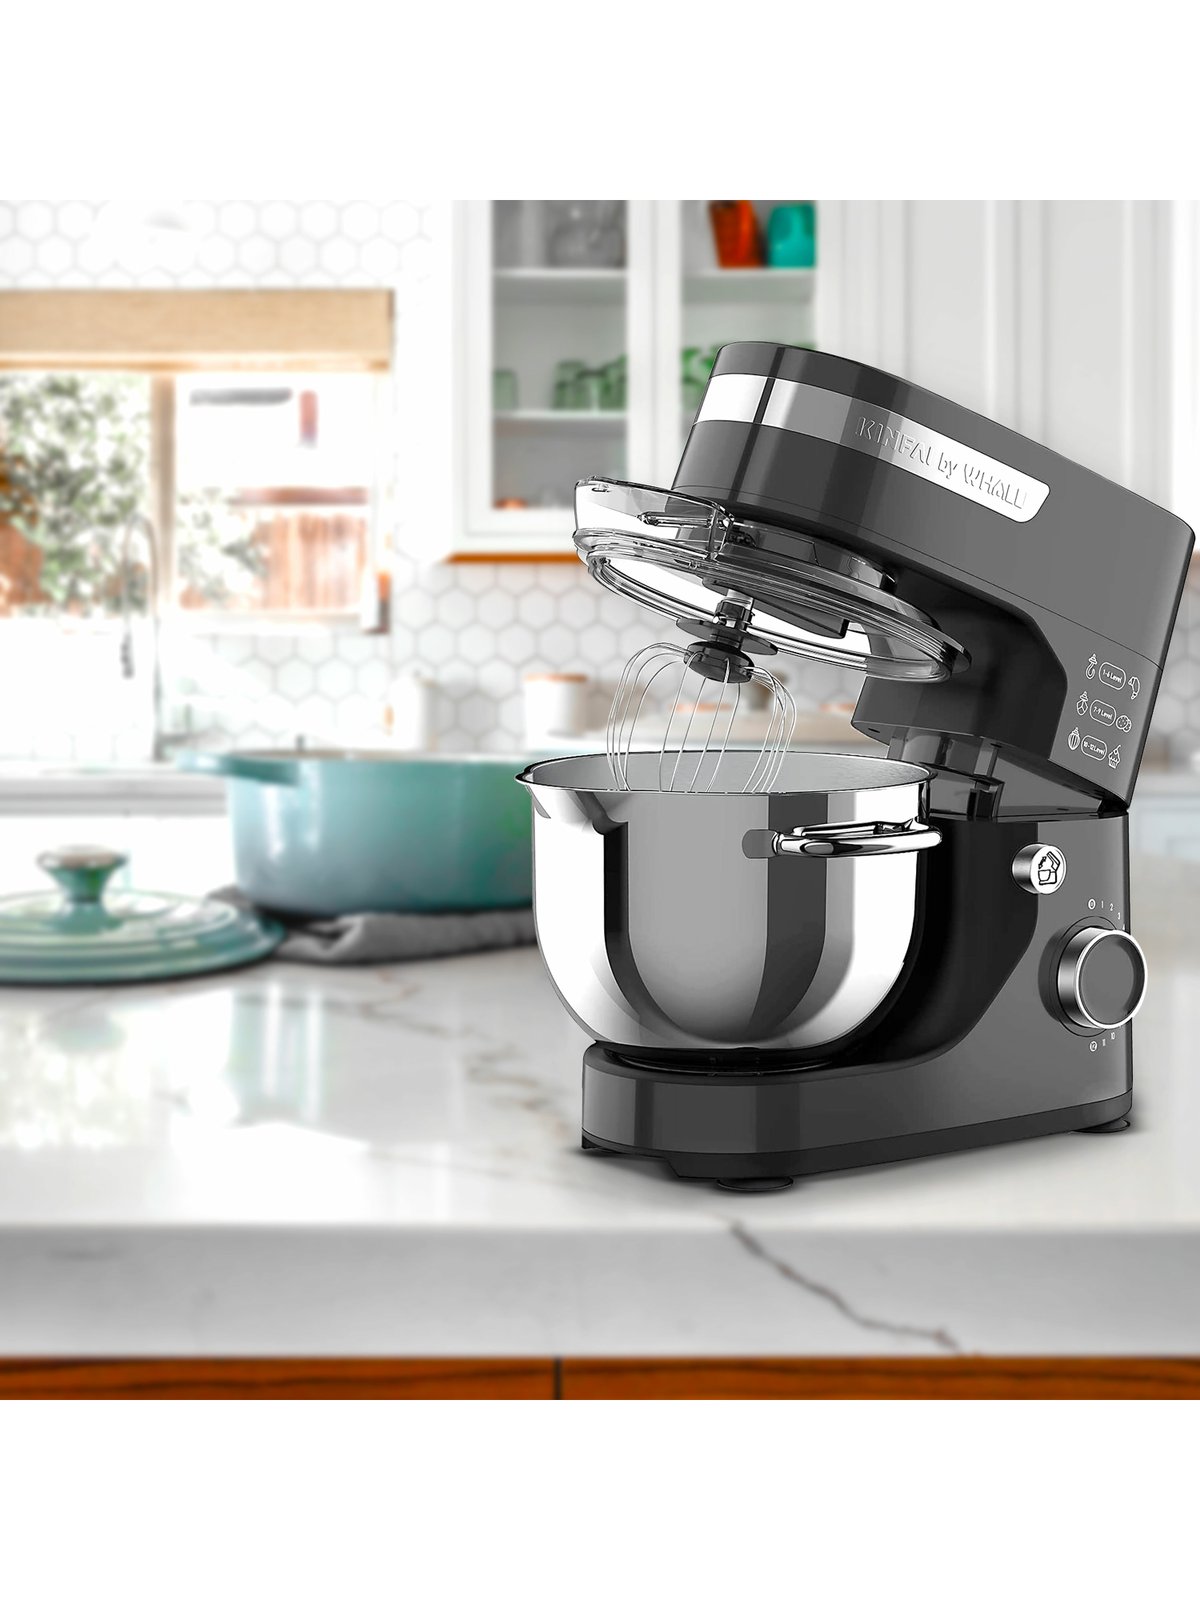 Make delicious recipes with the Kenwood Kmix Stand Mixer 